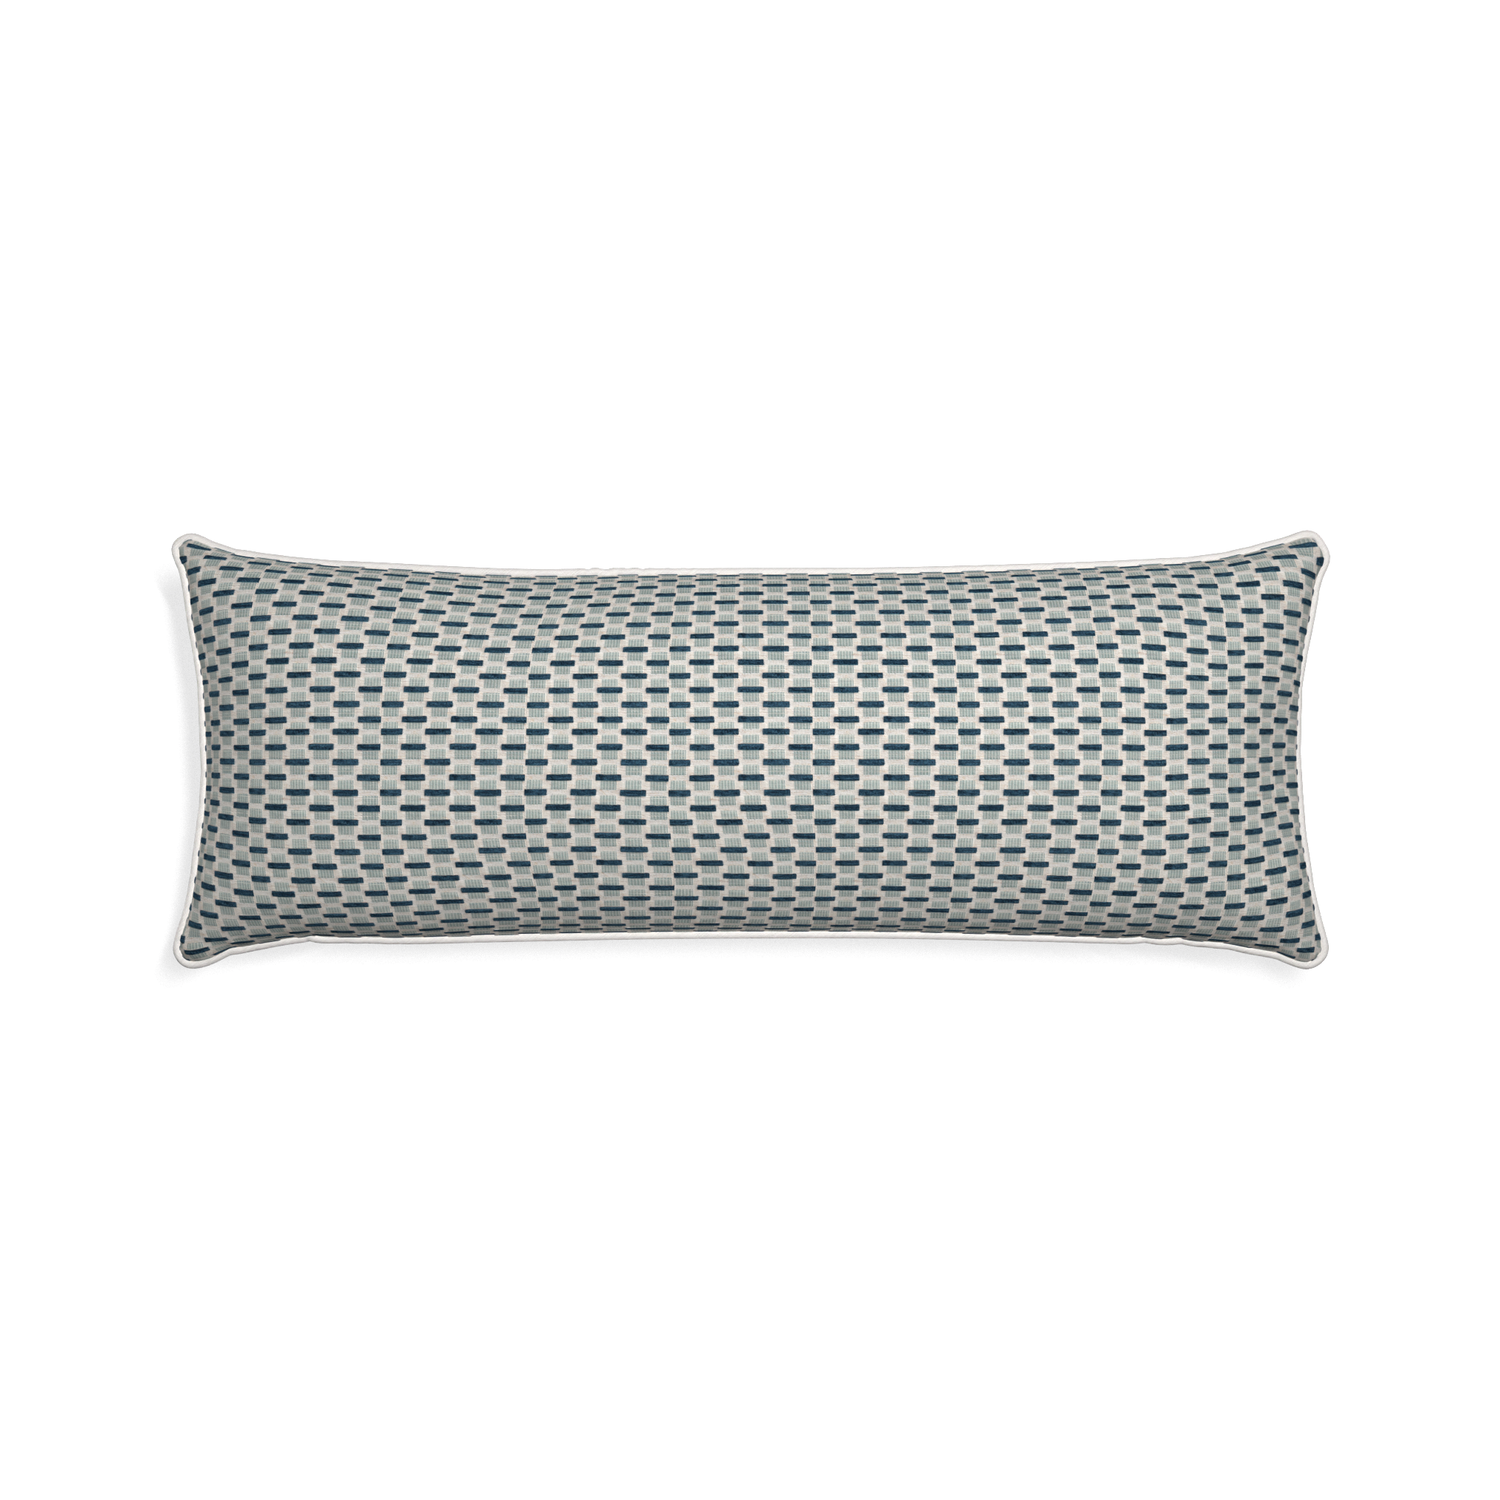 Xl-lumbar willow amalfi custom blue geometric chenillepillow with snow piping on white background